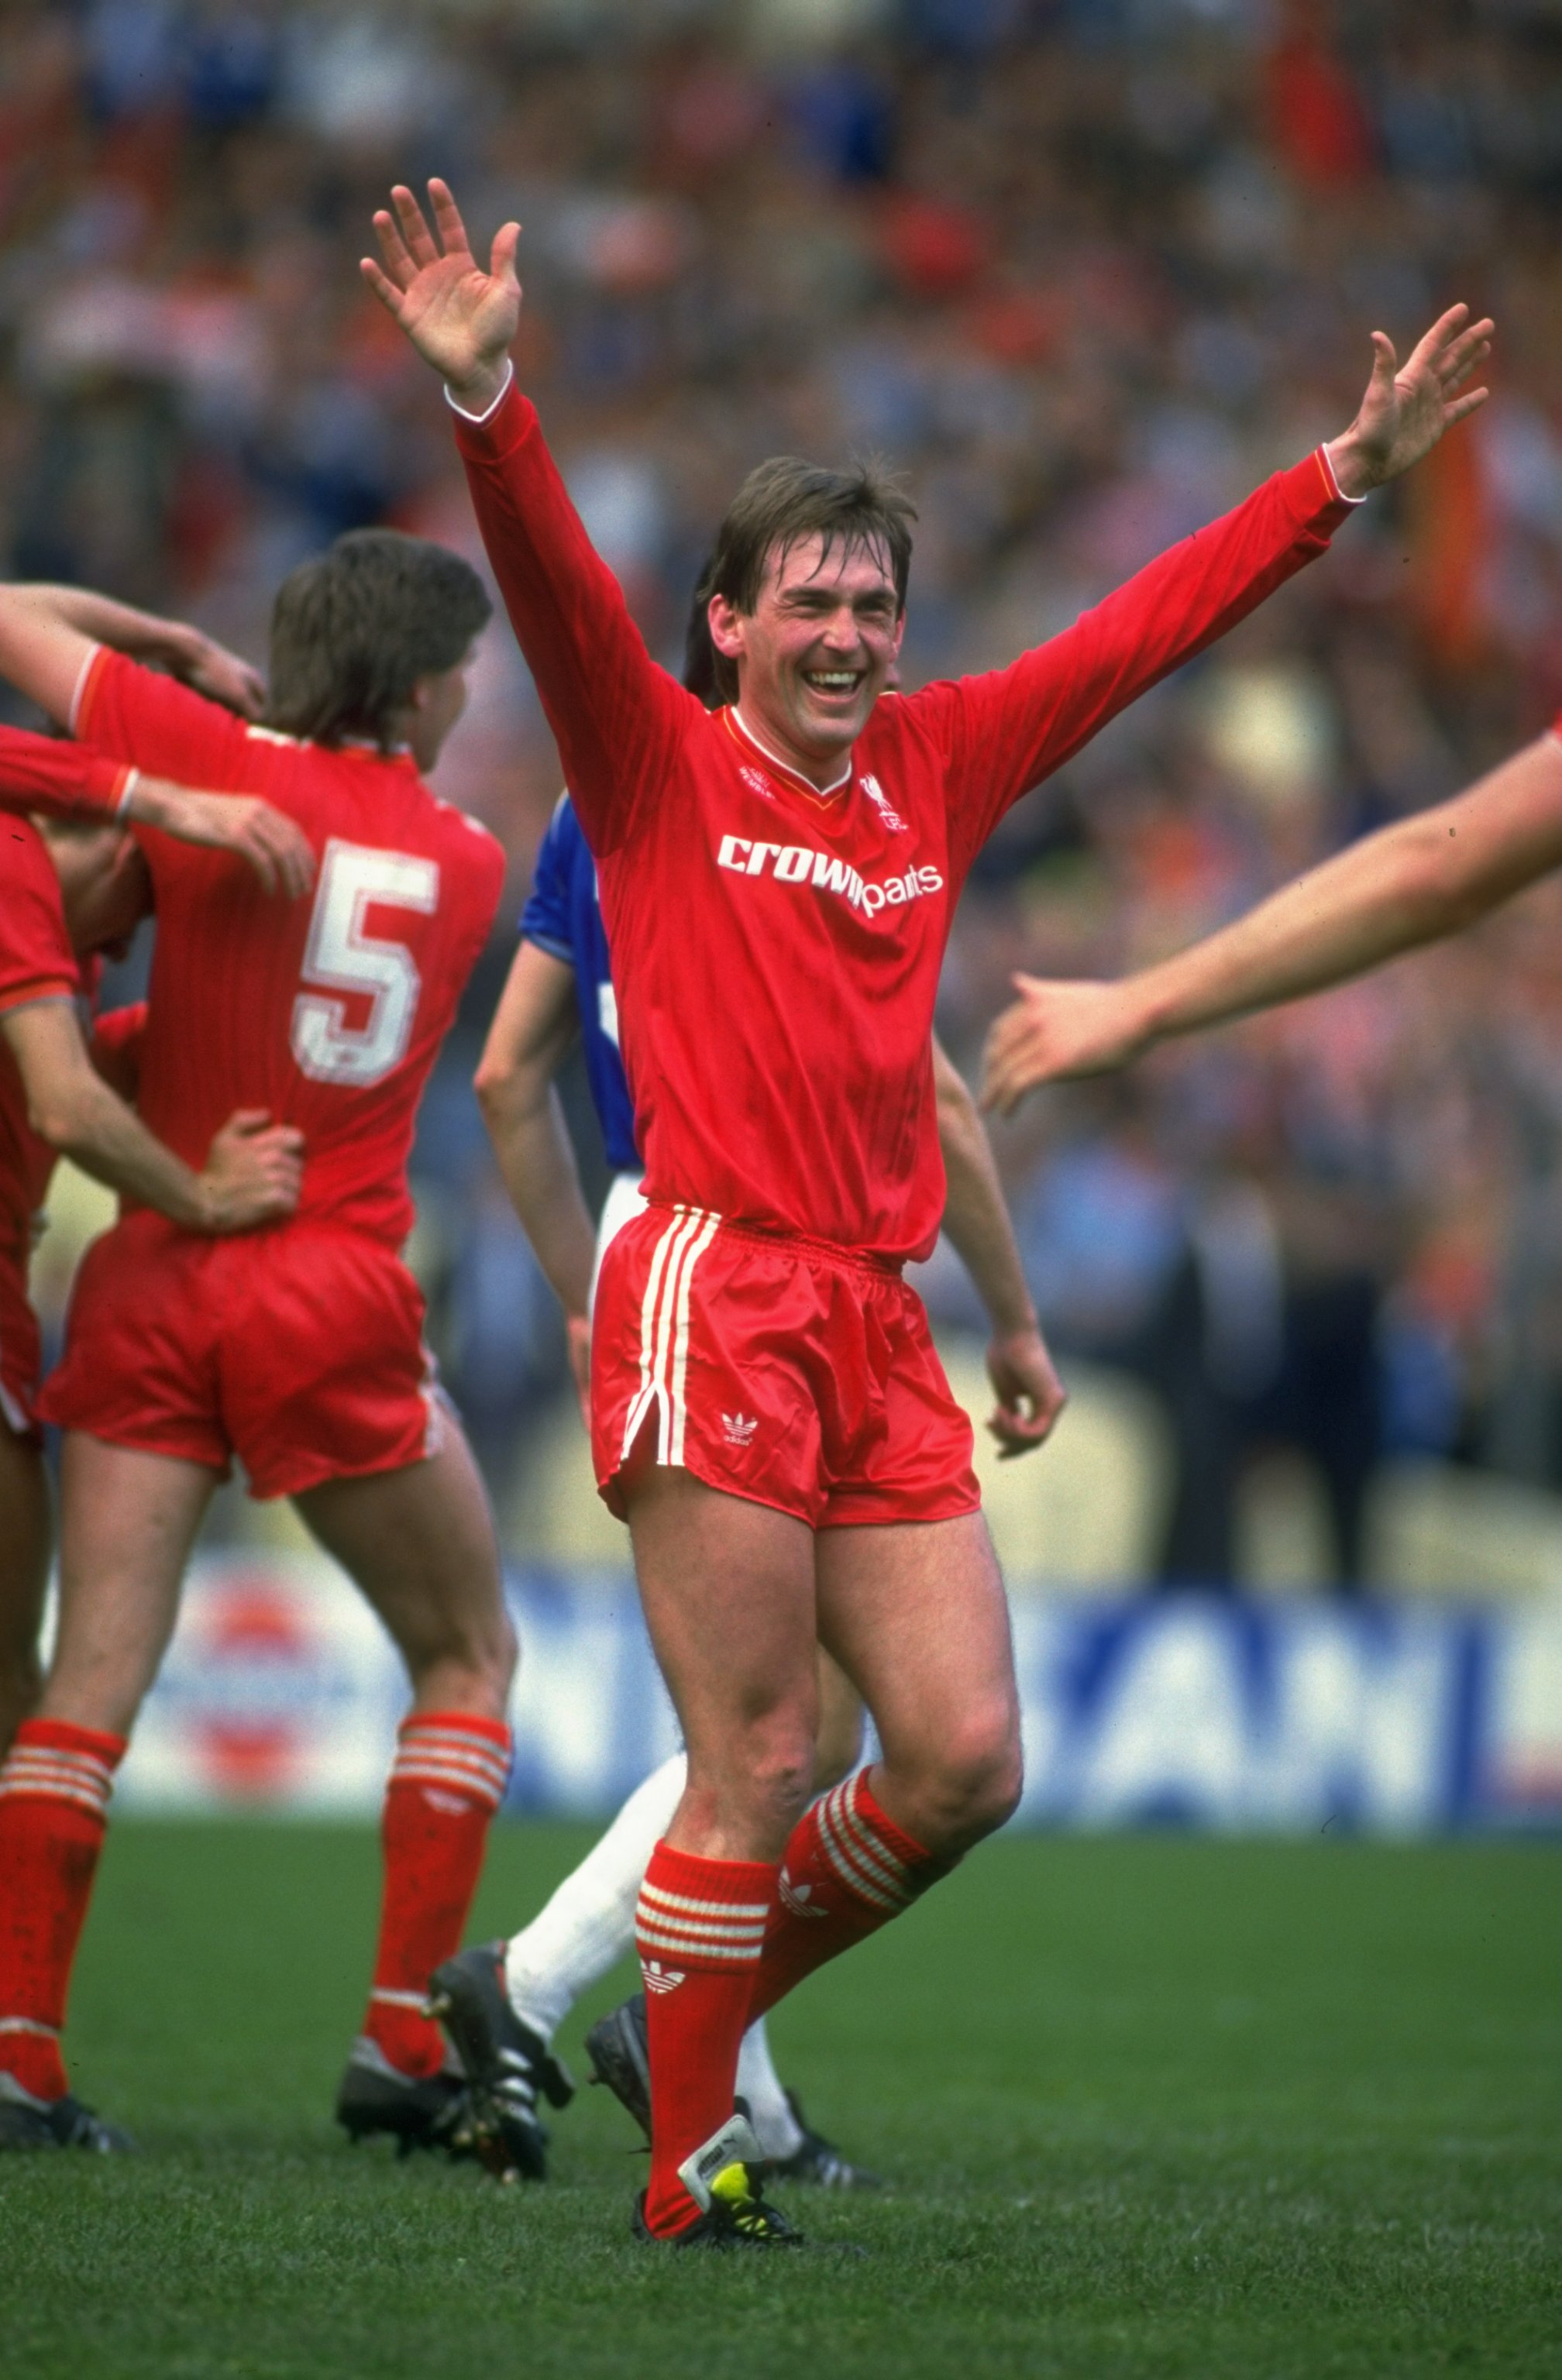 1986:  Kenny Dalglish of Liverpool celebrates during the FA Cup final against Everton at Wembley Stadium in London. Liverpool won the match 3-1.  \ Mandatory Credit: David  Cannon/Allsport